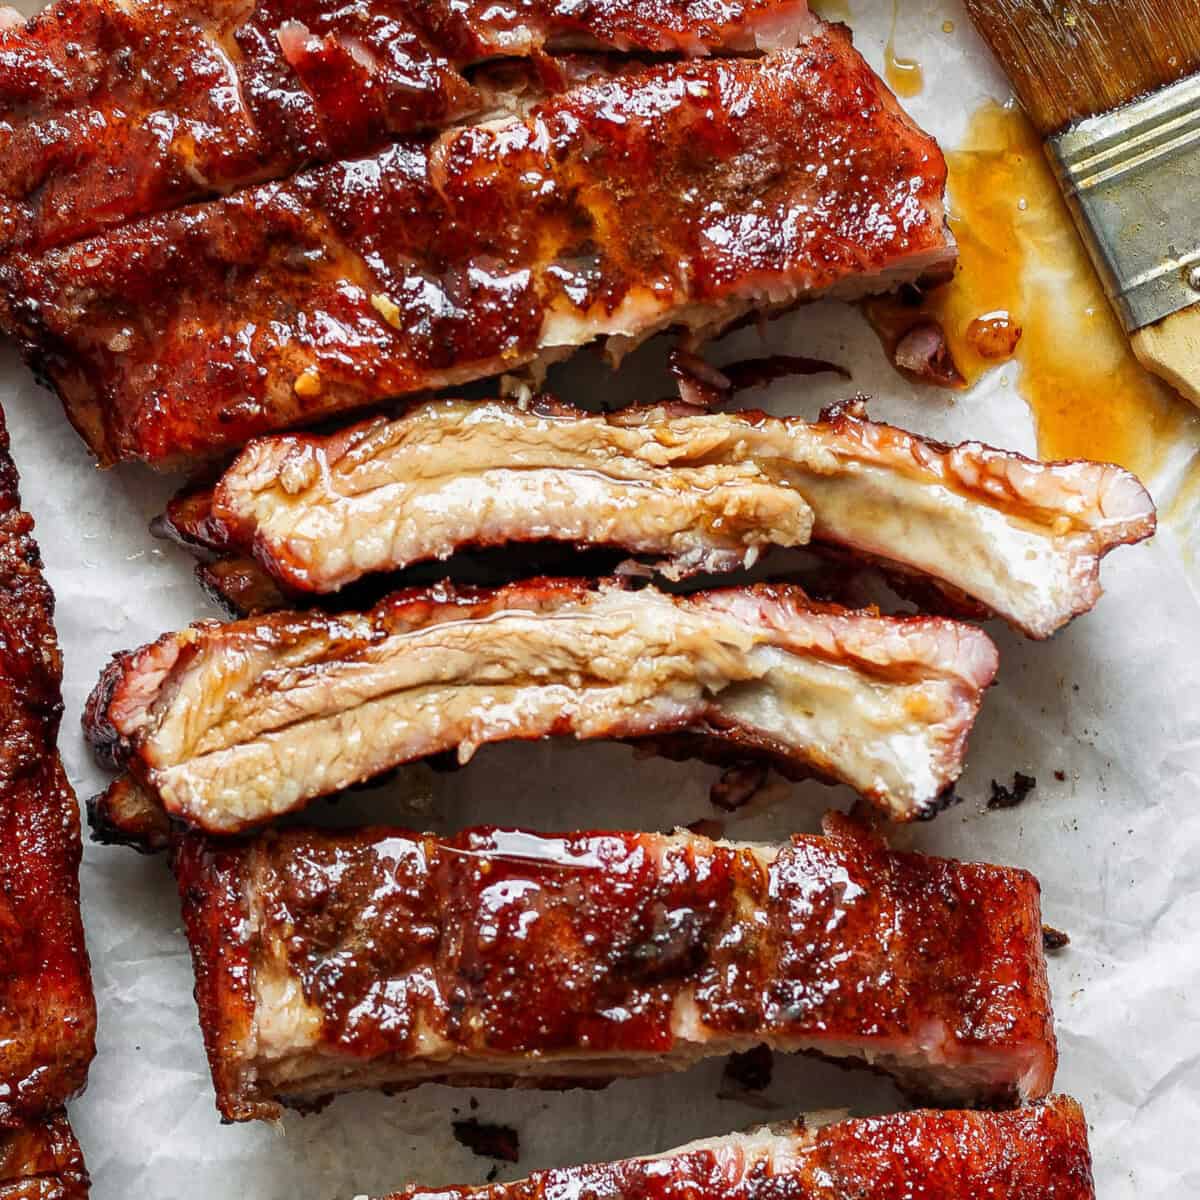 Close-up view of several pieces of glazed, barbecued ribs on parchment paper, with a brush coated in sauce to the side.